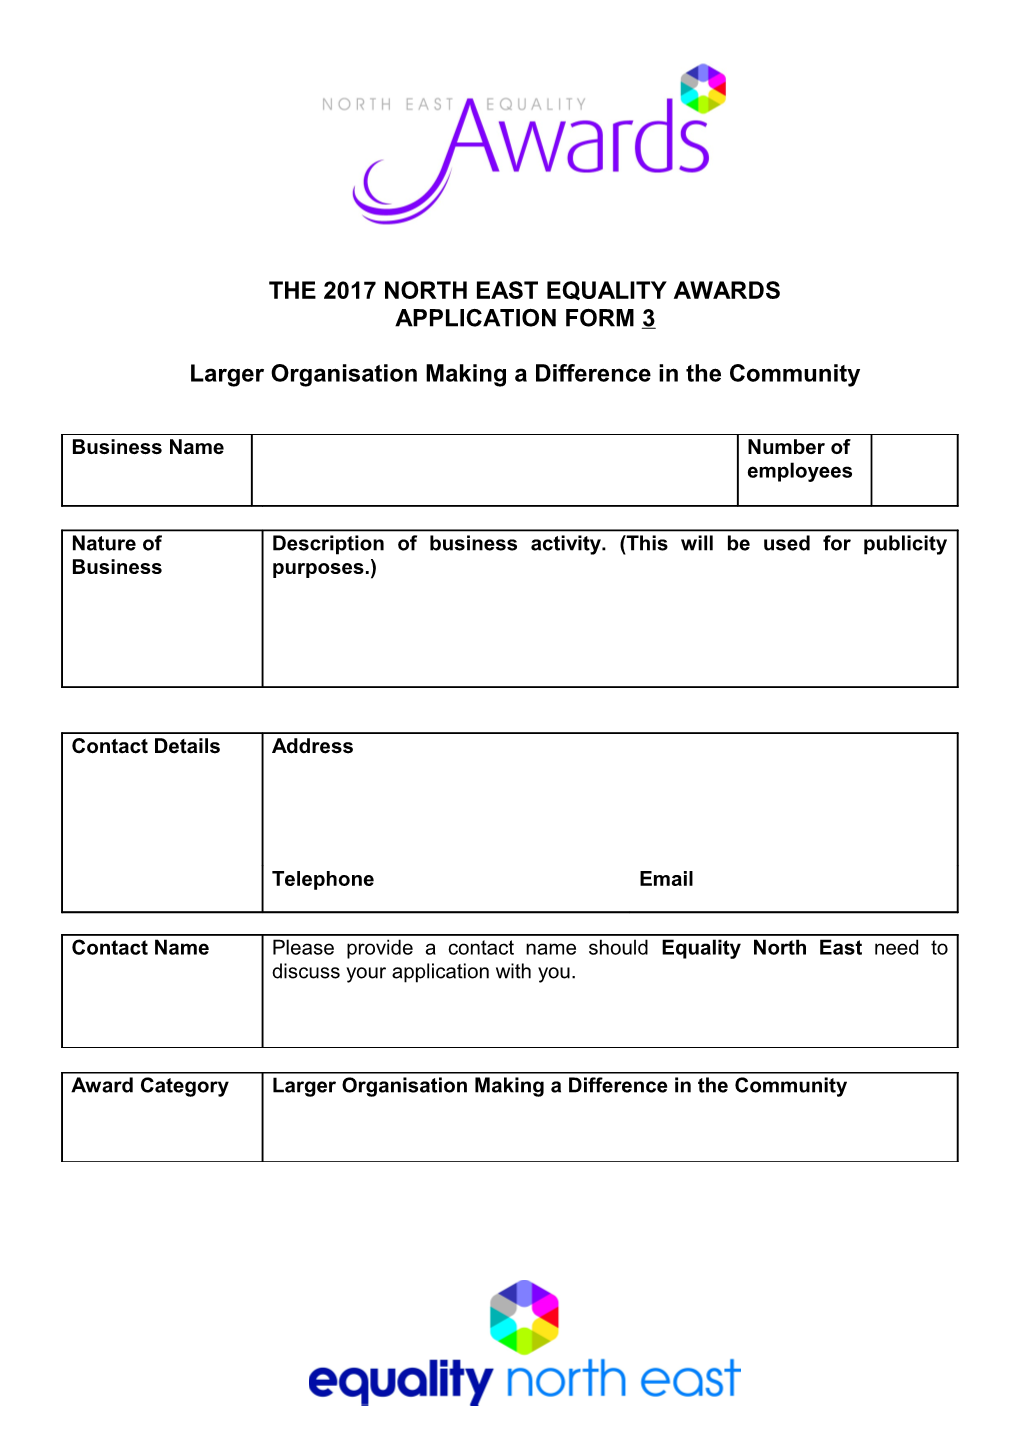 The 2017 North East Equality Awards